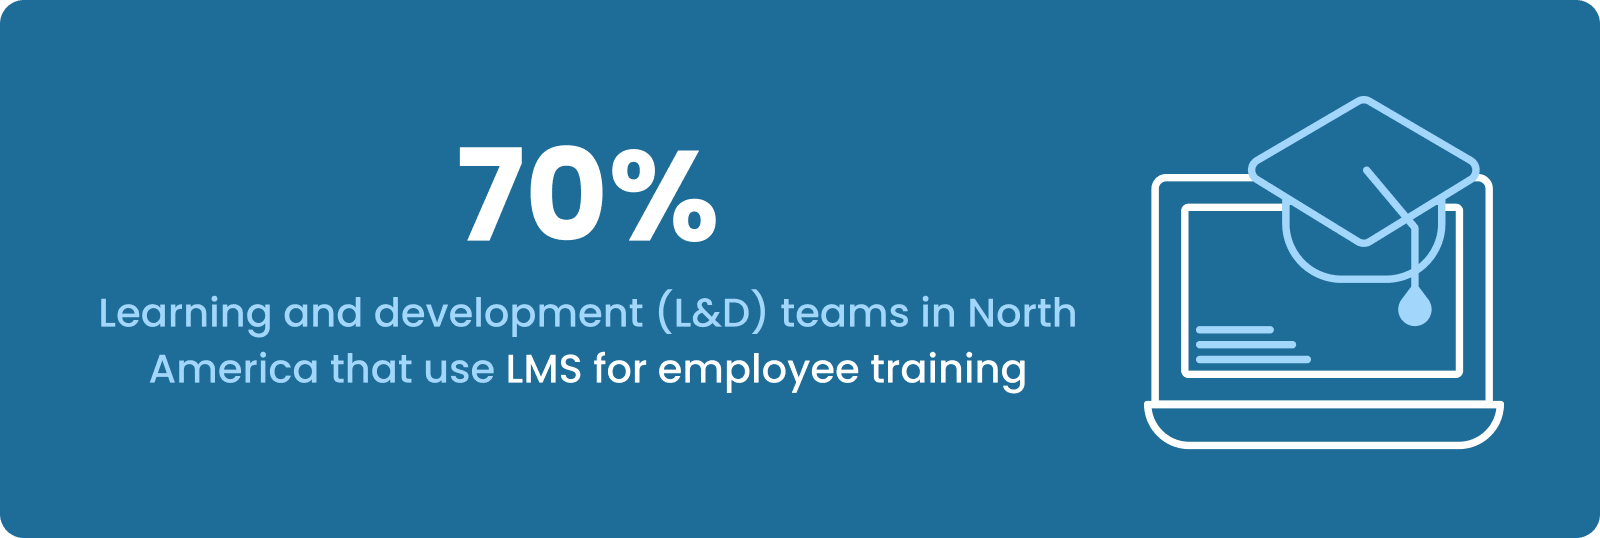 Percentage of Organizations Using LMS in North America